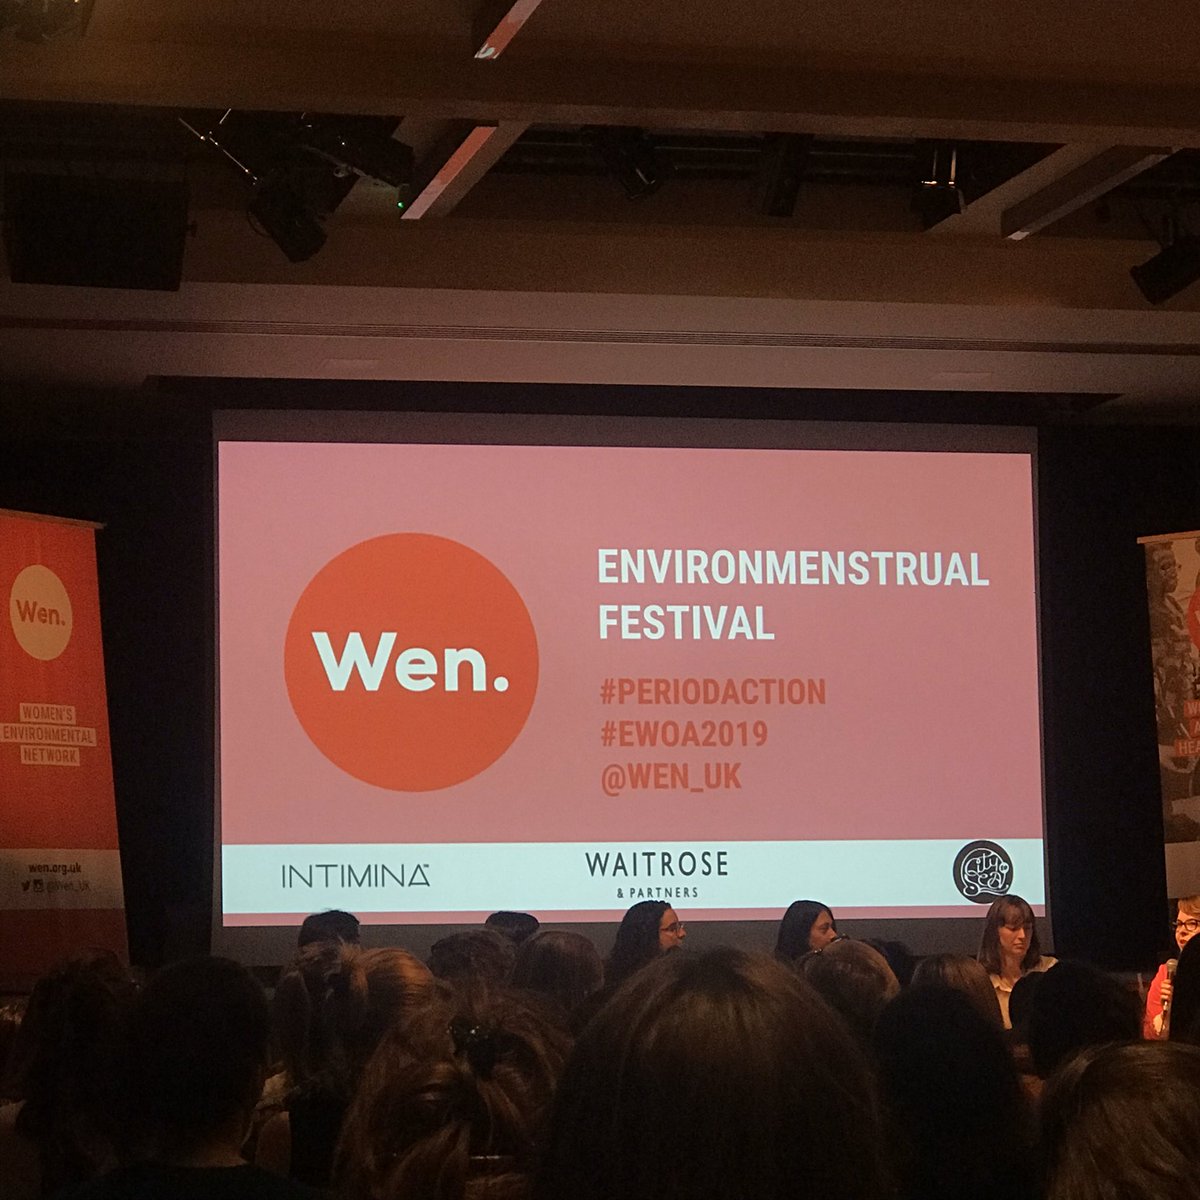 What a fantastic event from @WEN_UK for #environmenstrualweek. Celebrating all things #period ❣️glad to be part of such an inspirational group of people #periodaction #sustainableperiods #plasticfreeperiods